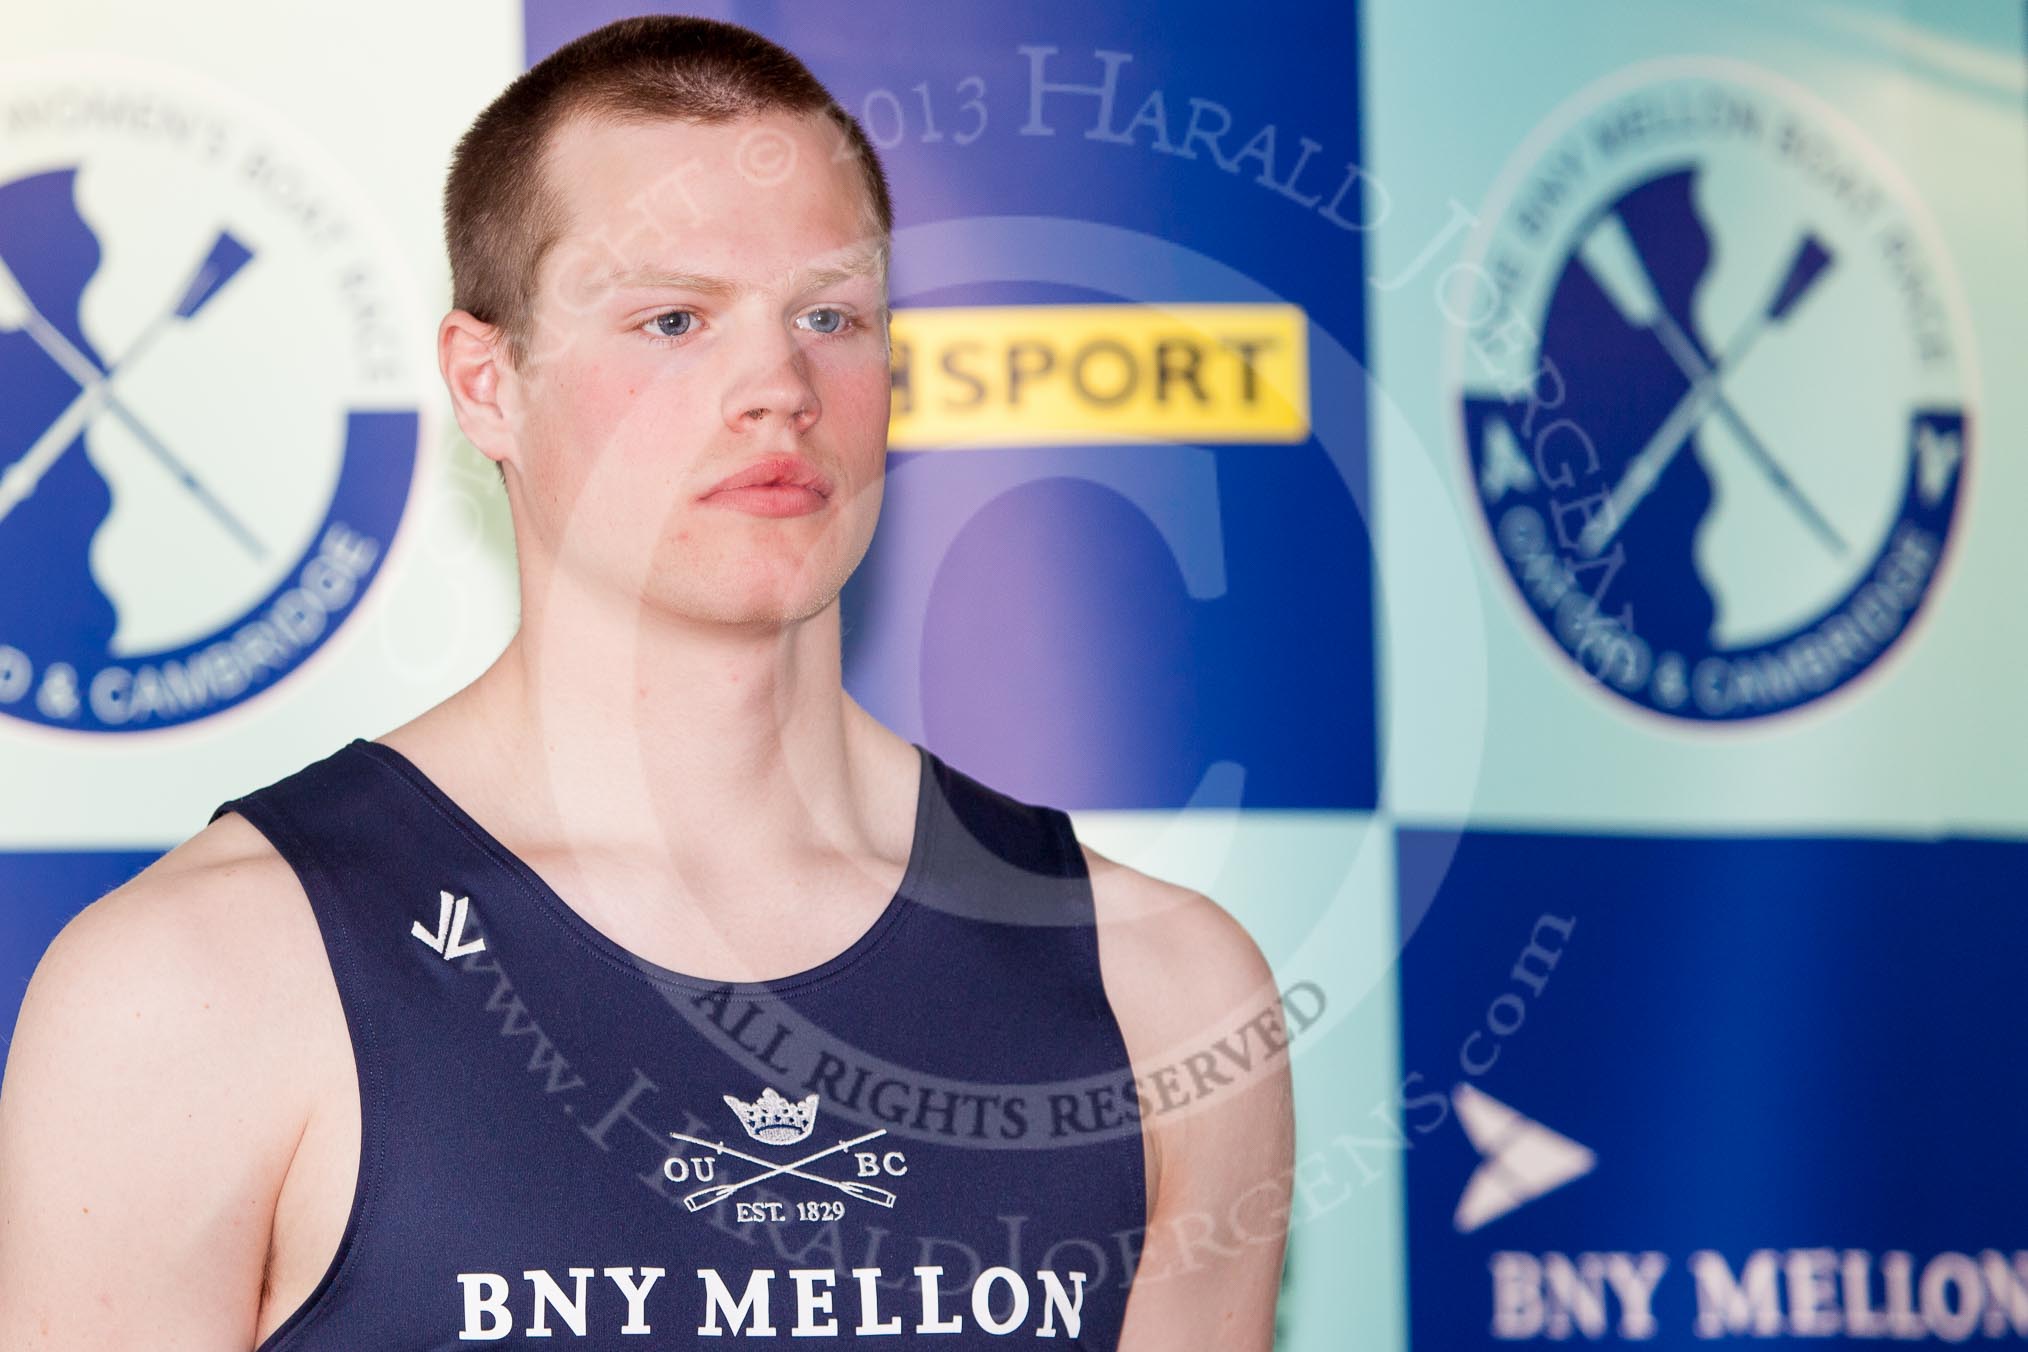 The Boat Race season 2013 - Crew Announcement and Weigh In: The crew for the men's 2013 Boat Race: In the Oxford two seat Geordie Macleod – 87.0kg..
BNY Mellon Centre,
London EC4V 4LA,

United Kingdom,
on 04 March 2013 at 10:27, image #49